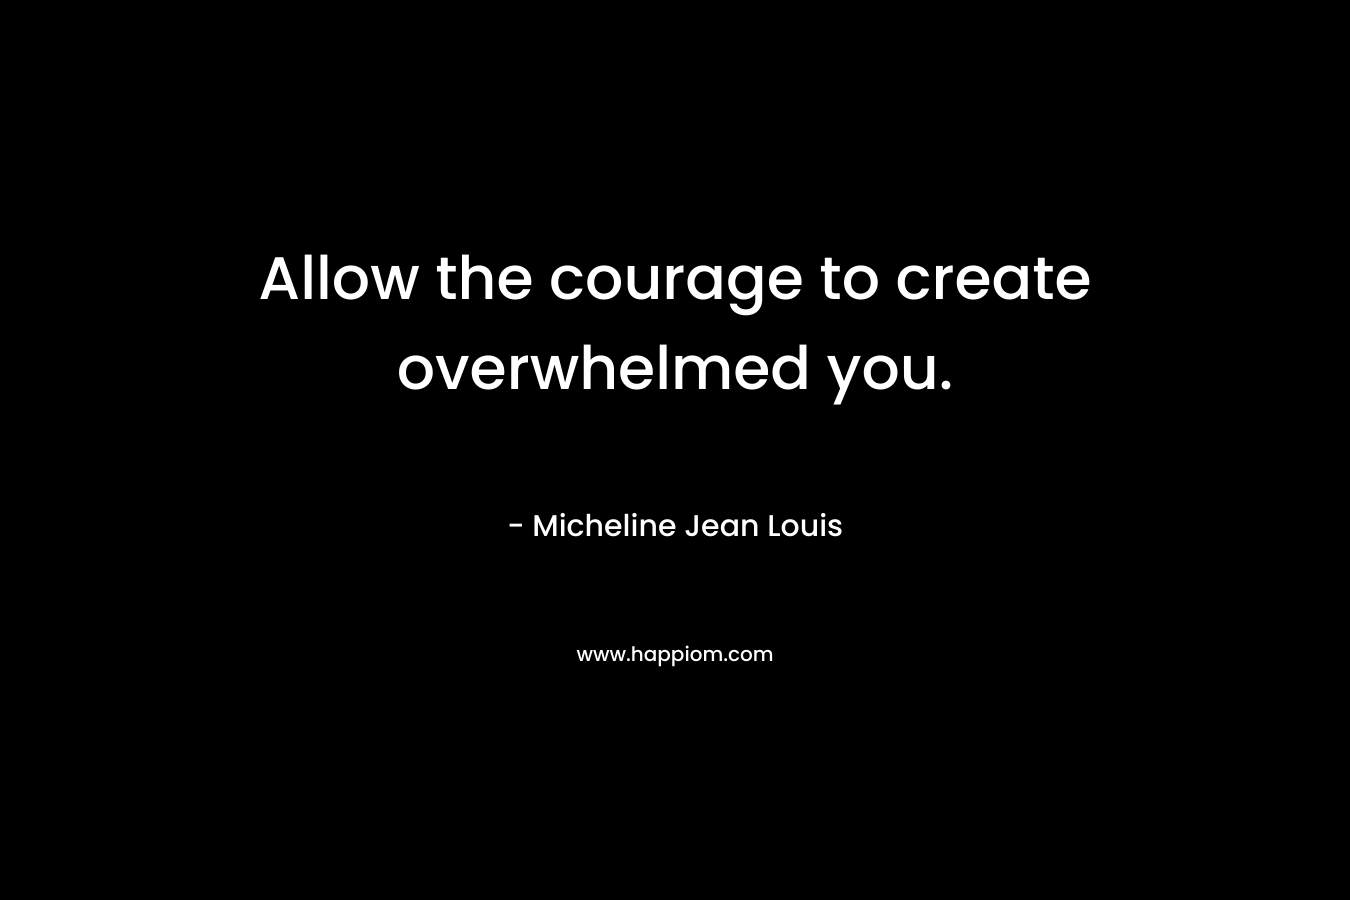 Allow the courage to create overwhelmed you.